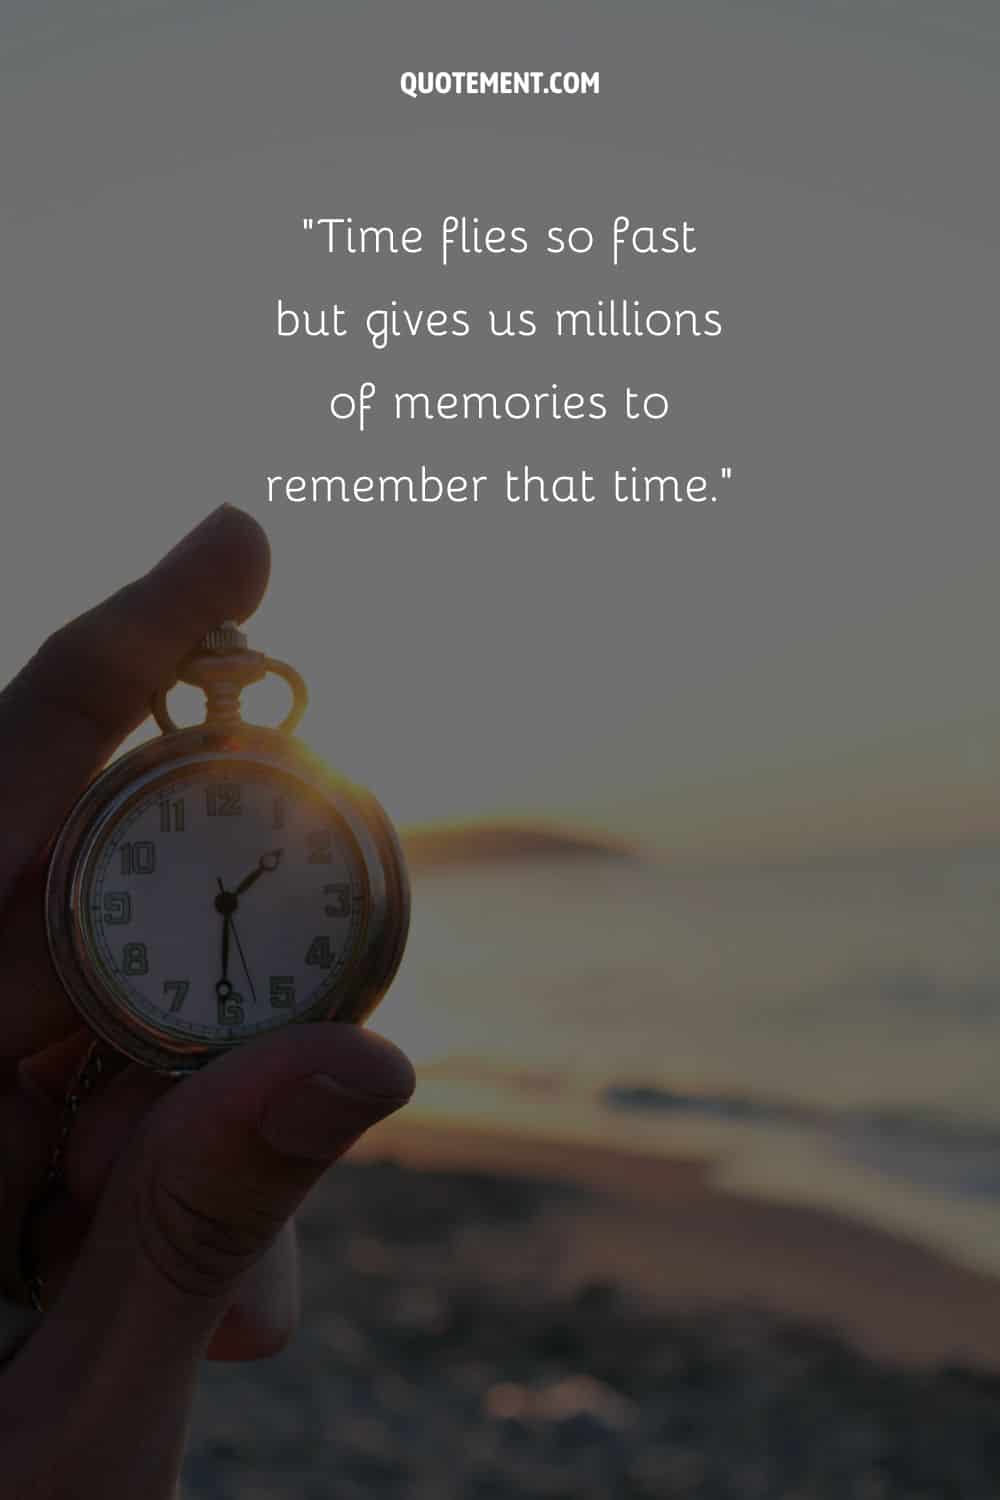 a pocket watch in the hand of a man representing inspirational time flies so fast quote
